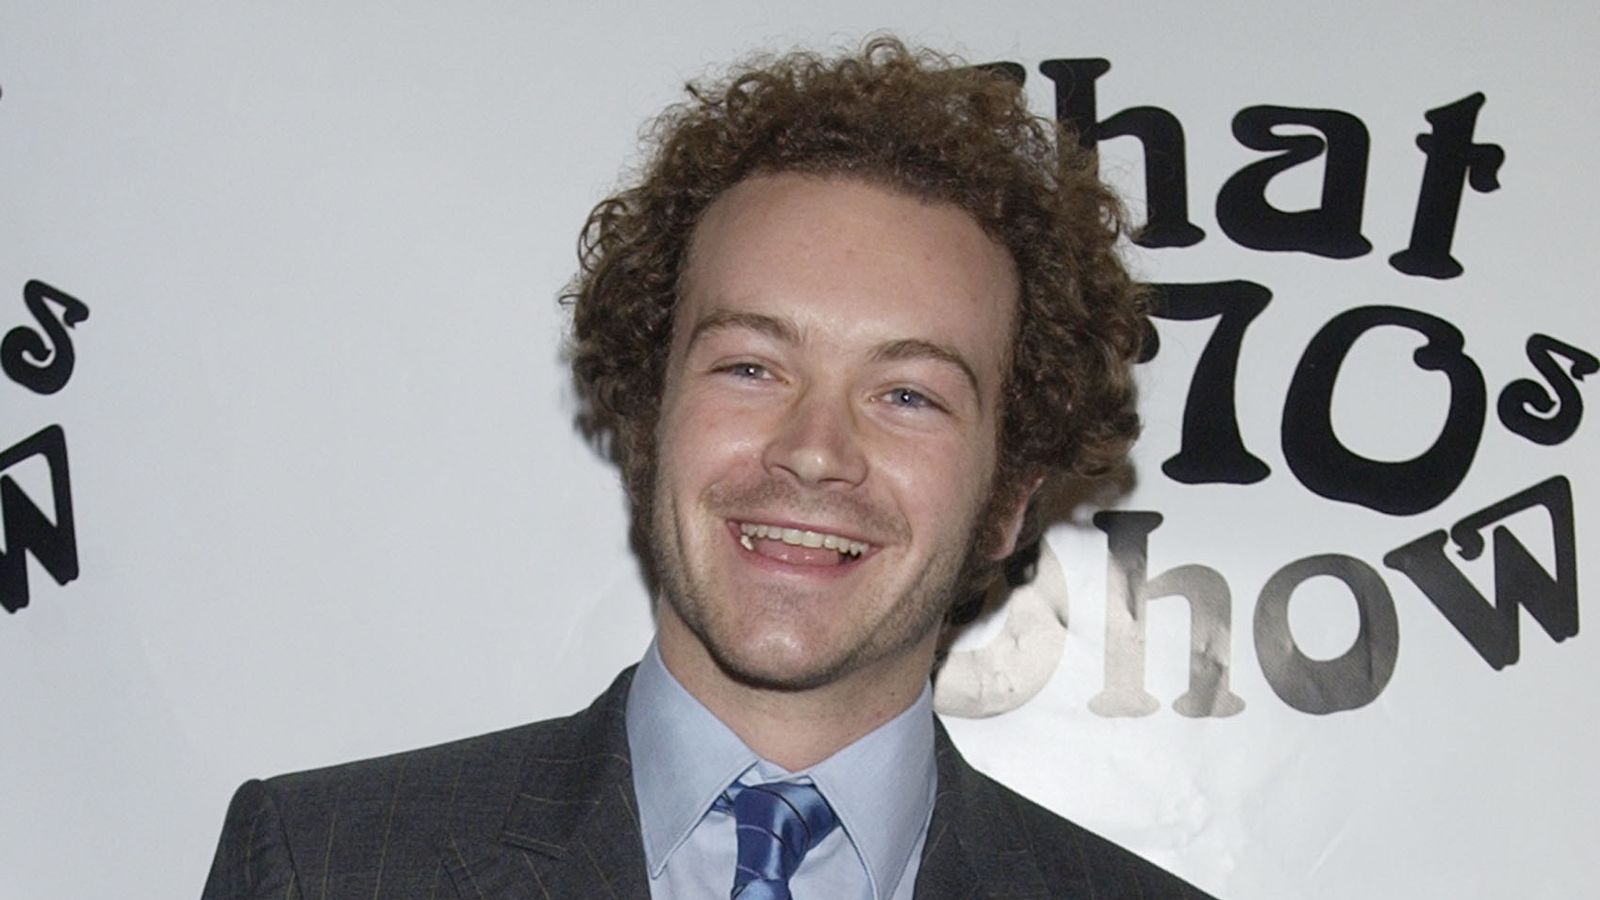 Danny Masterson: That 70s Show star 'raped women and hid behind Church of Scientology', court told